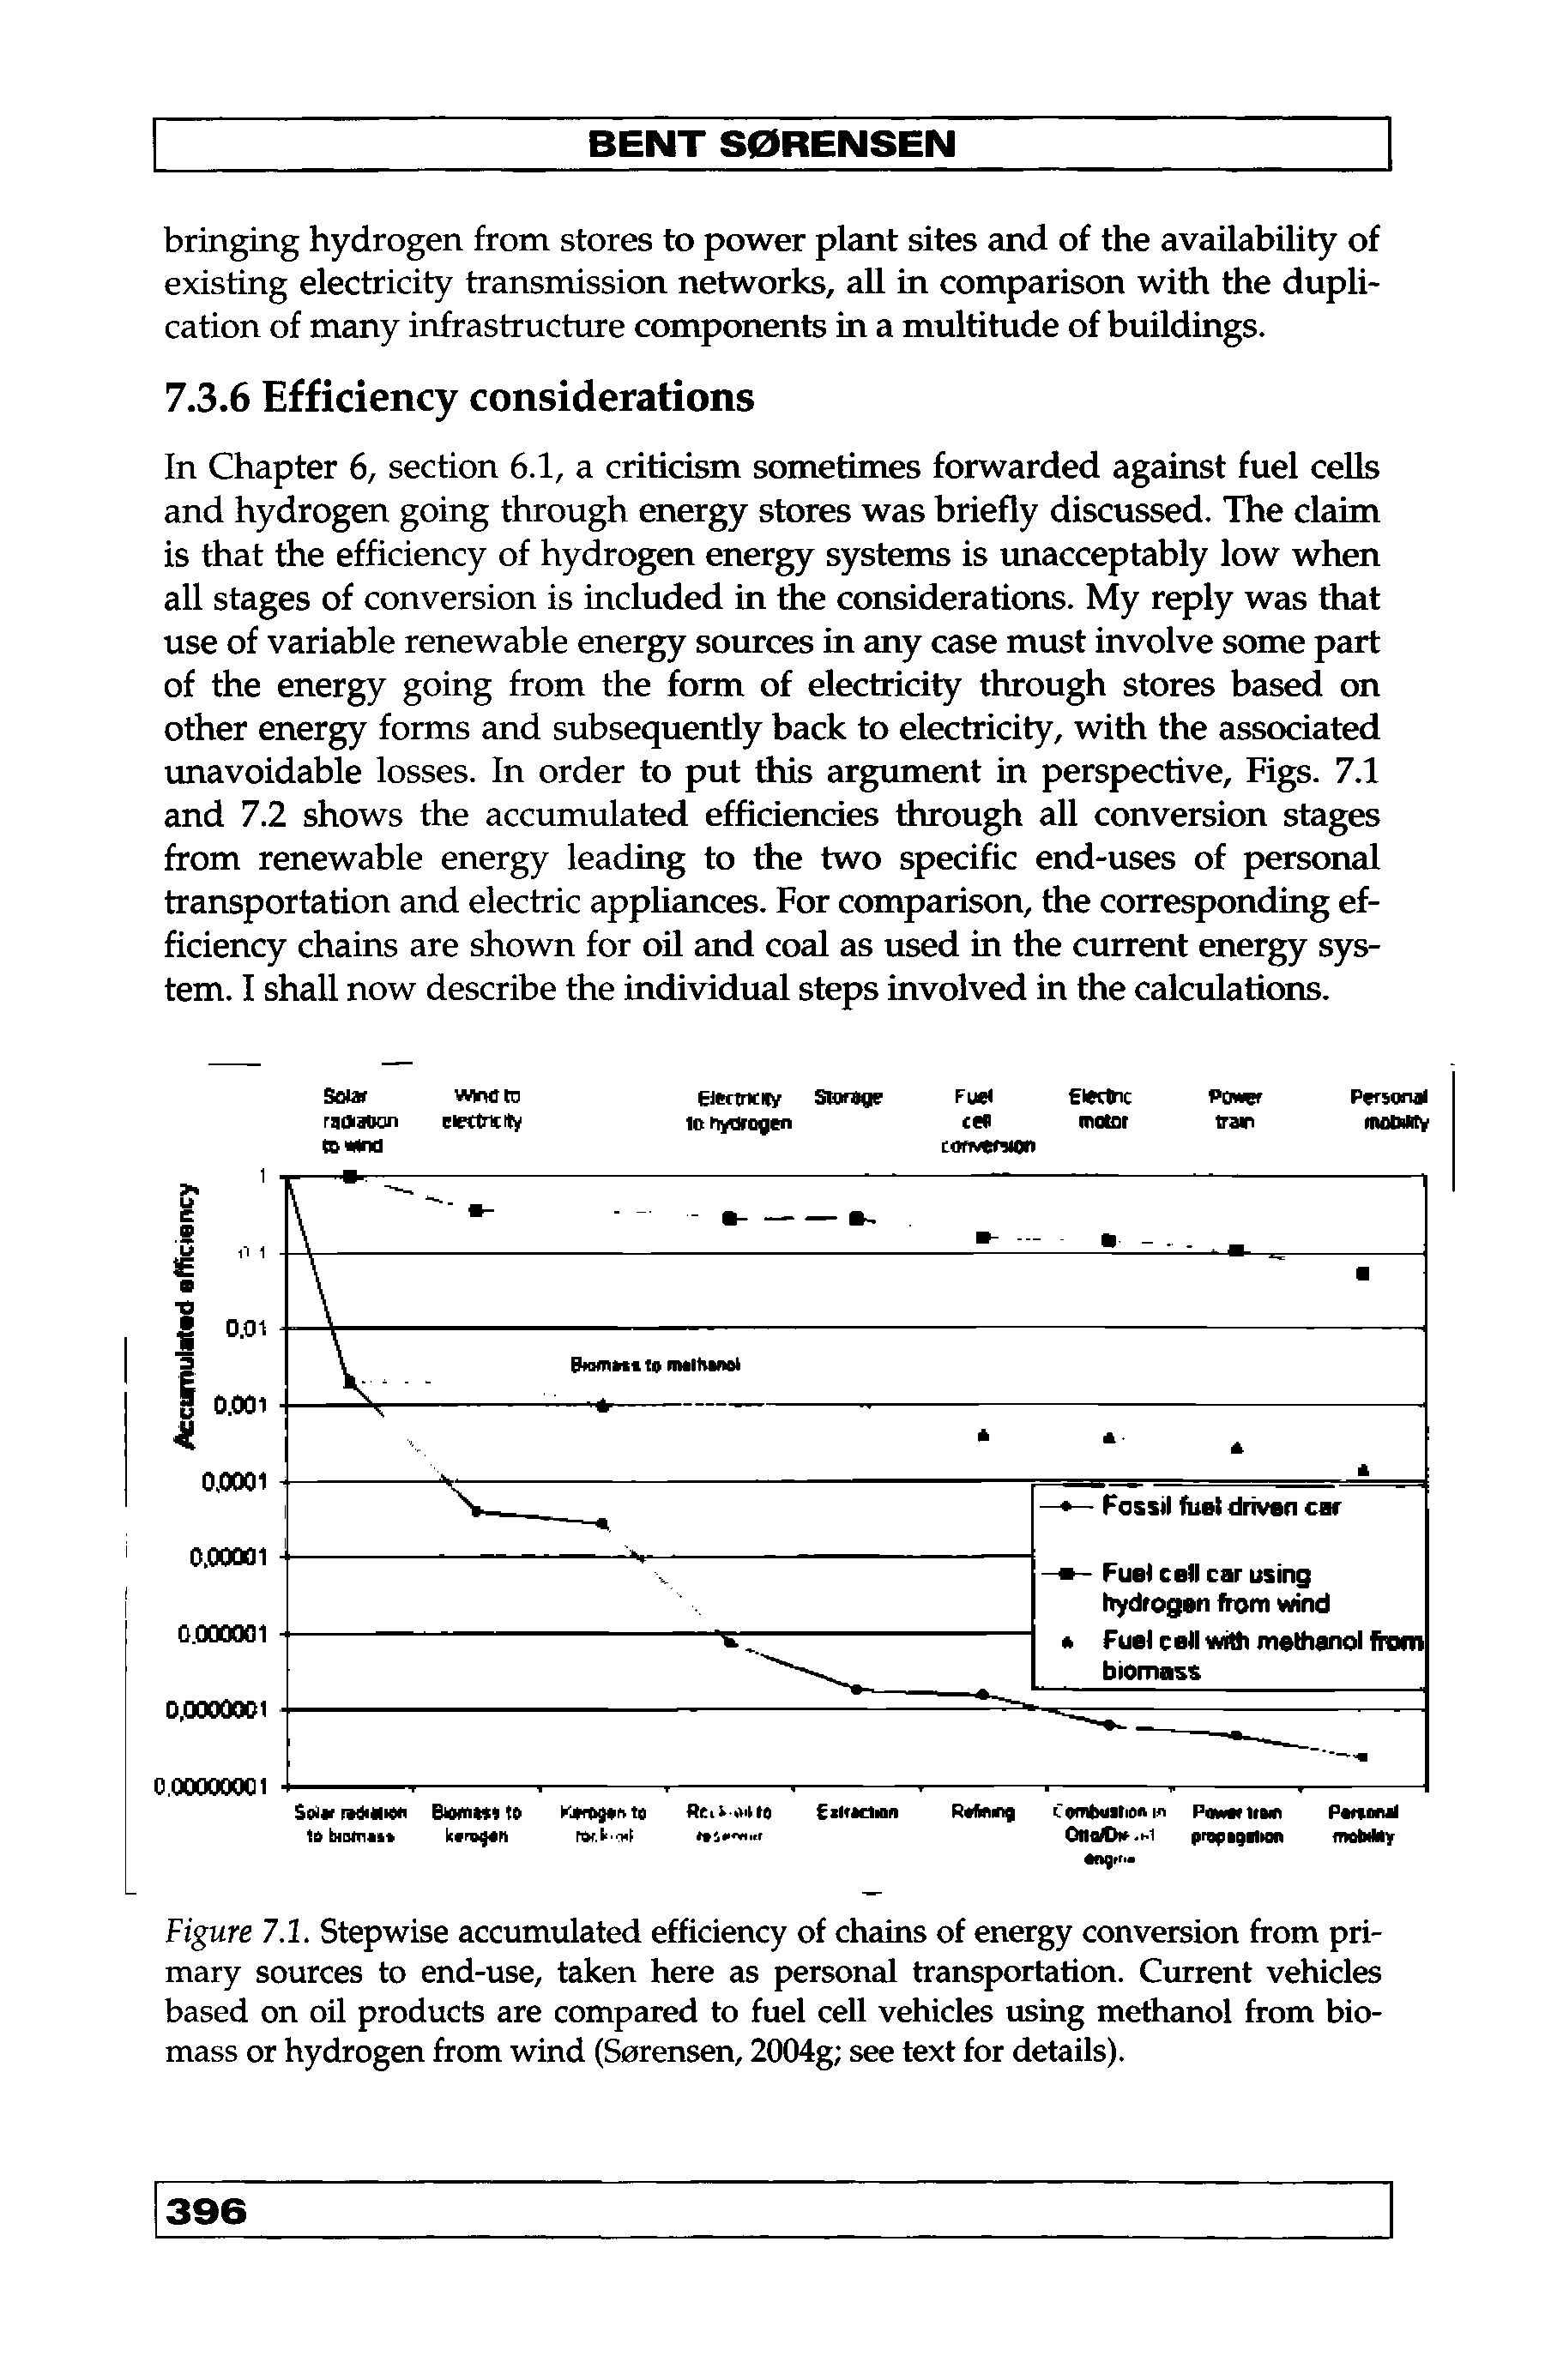 Figure 7.1. Stepwise accumulated efficiency of chains of energy conversion from primary sources to end-use, taken here as personal transportation. Current vehicles based on oil products are compared to fuel cell vehicles using methanol from biomass or hydrogen from wind (Sorensen, 2004g see text for details).